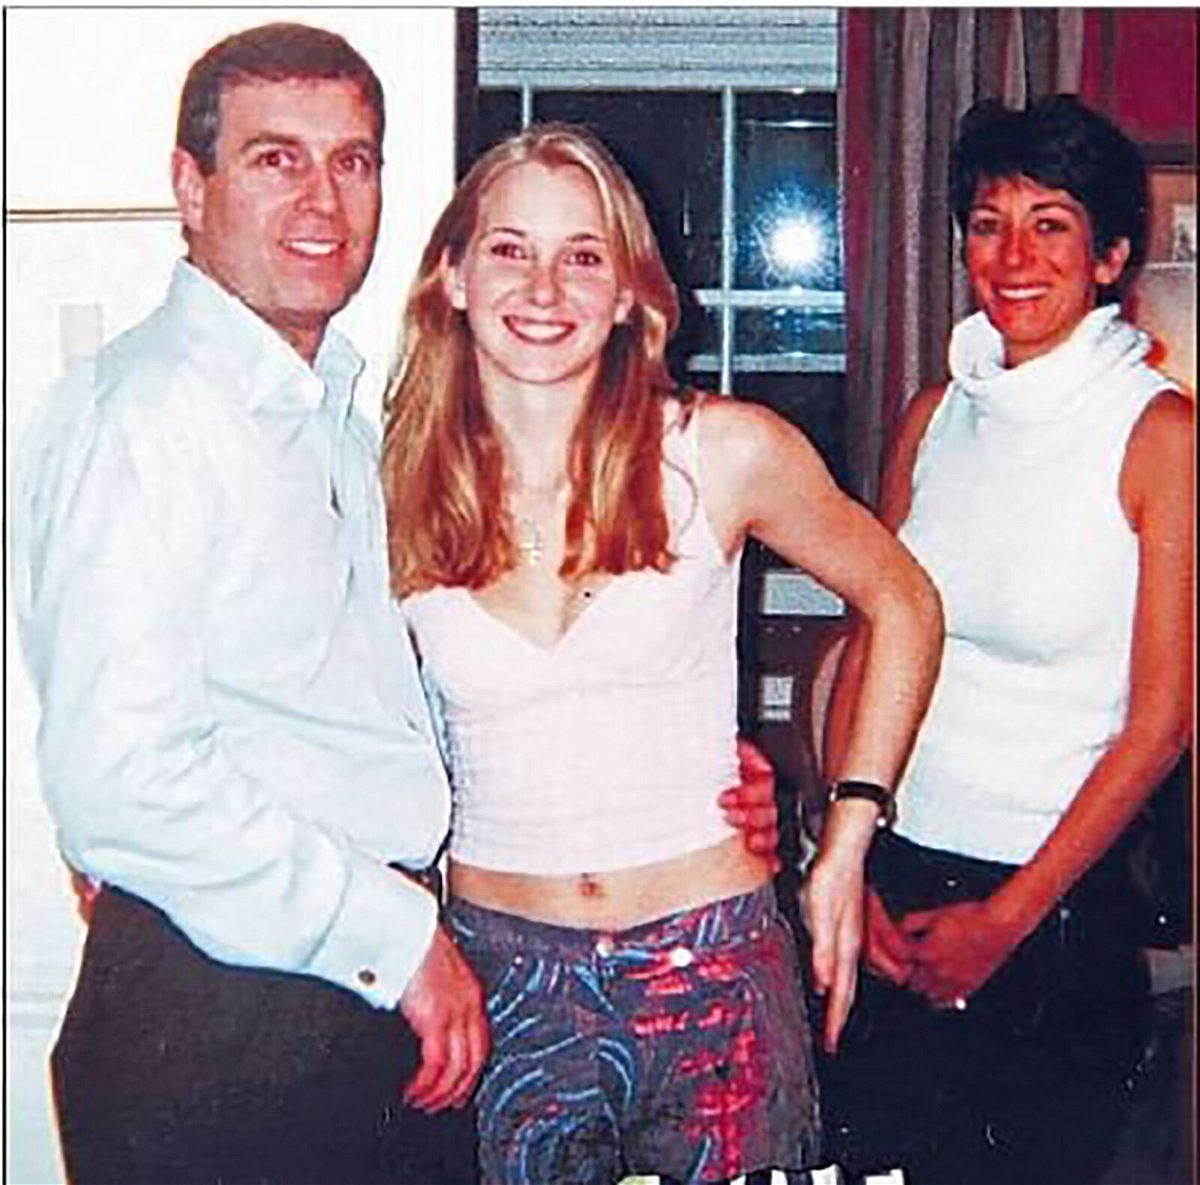 <i>Florida Southern District Court</i><br/>Photograph appearing to show Prince Andrew Duke York with Jeffrey Epstein's accuser Virginia Guifre and alleged madam Ghislaine Maxwell.